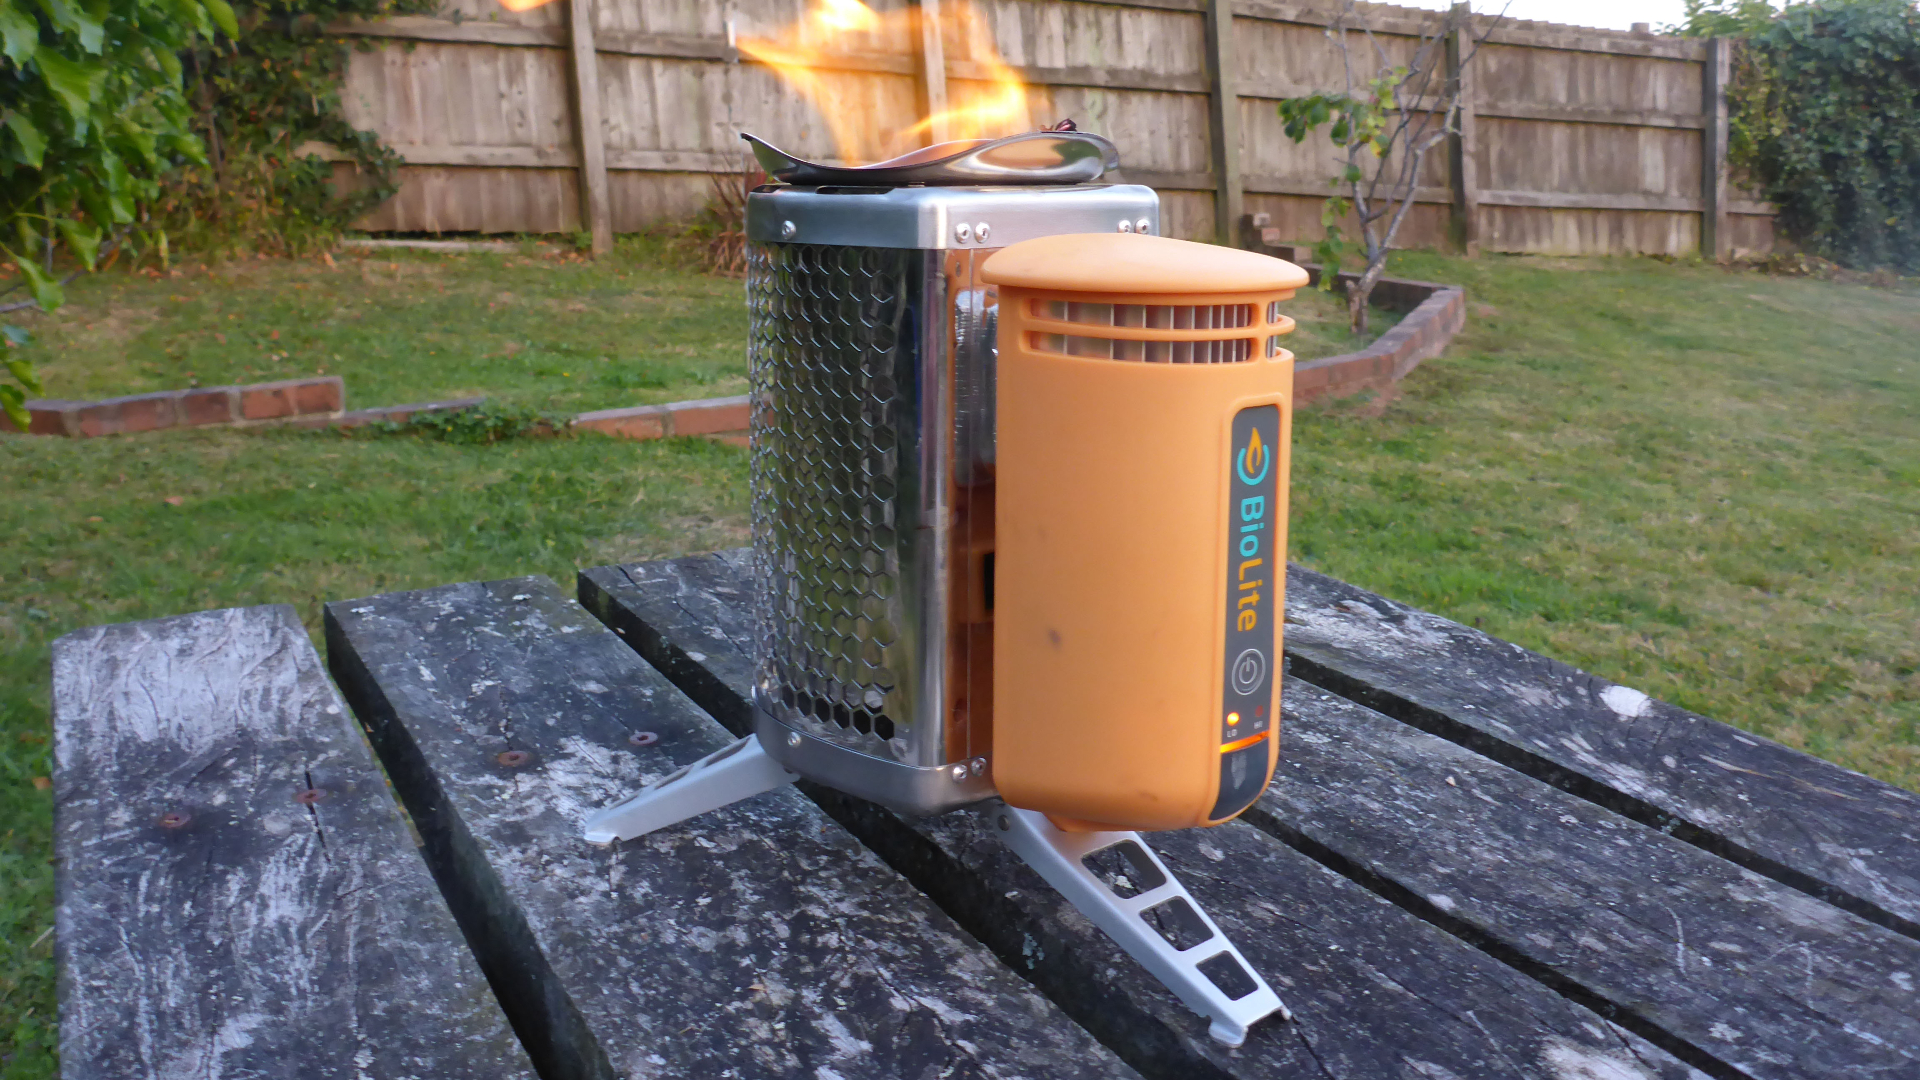 The nCamp Wood Burning Camping Stove is a Backpacker's Best Friend